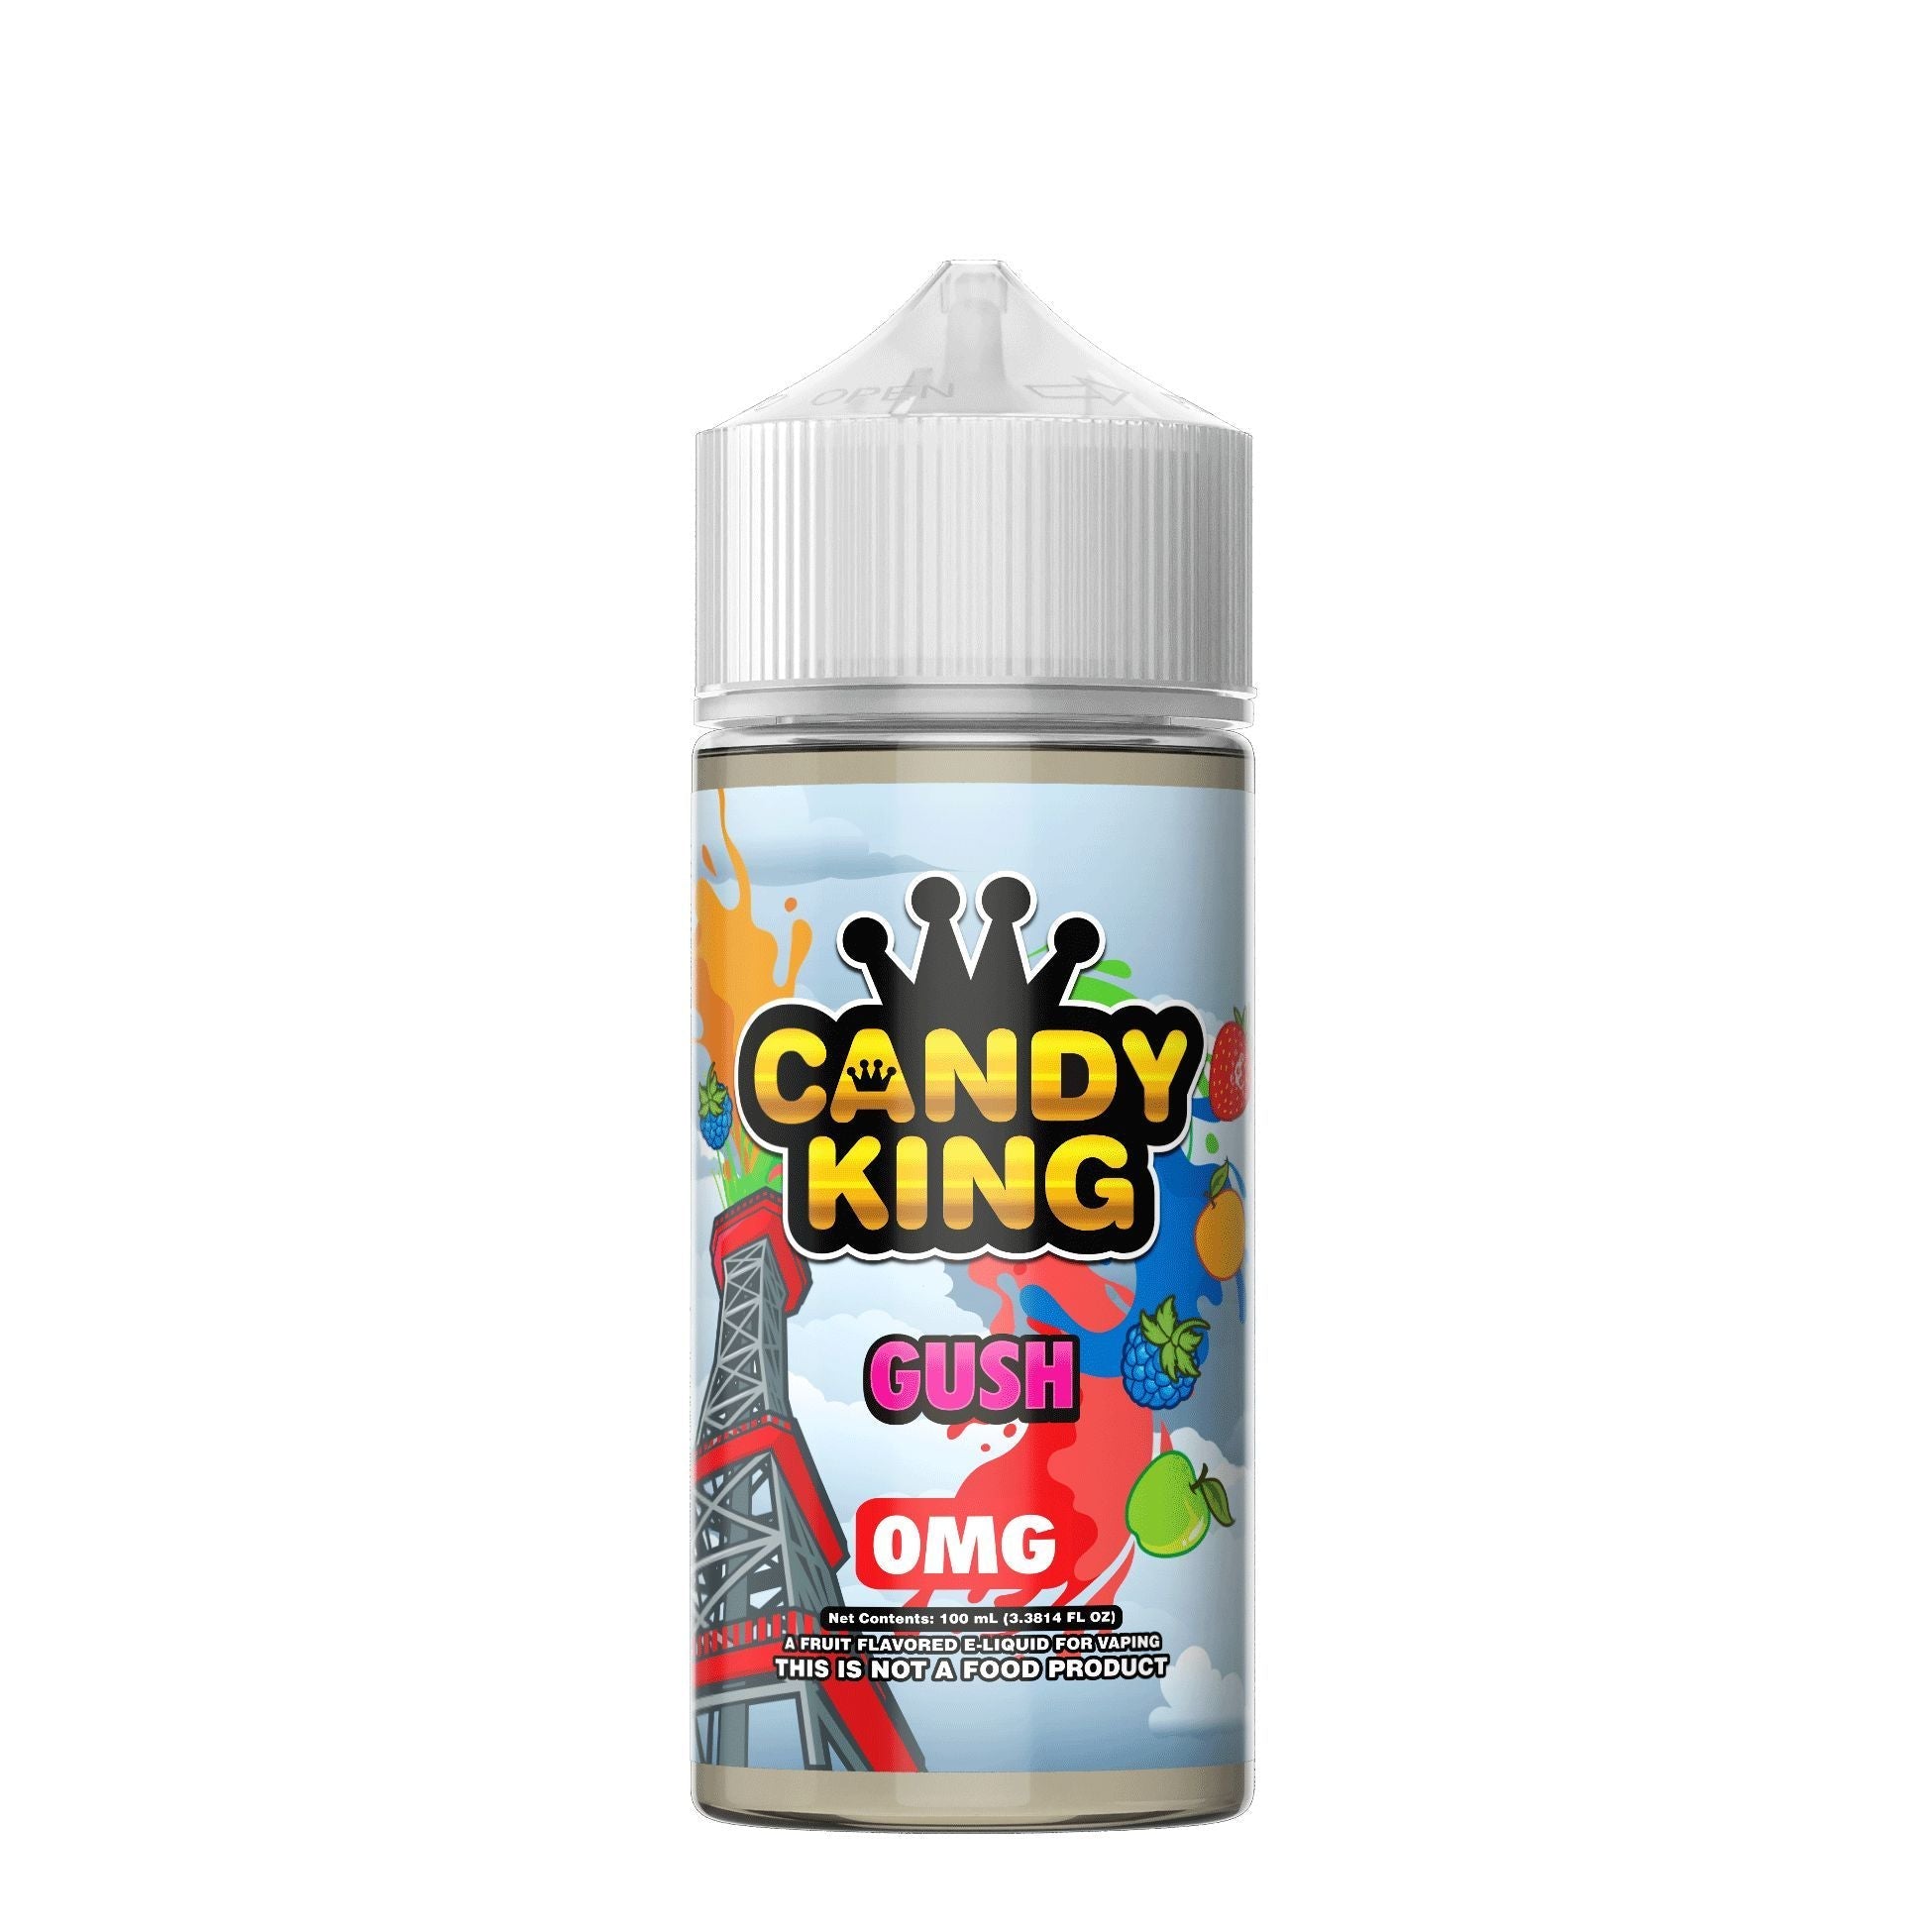 Buy Gush by Candy King - Wick And Wire Co Melbourne Vape Shop, Victoria Australia